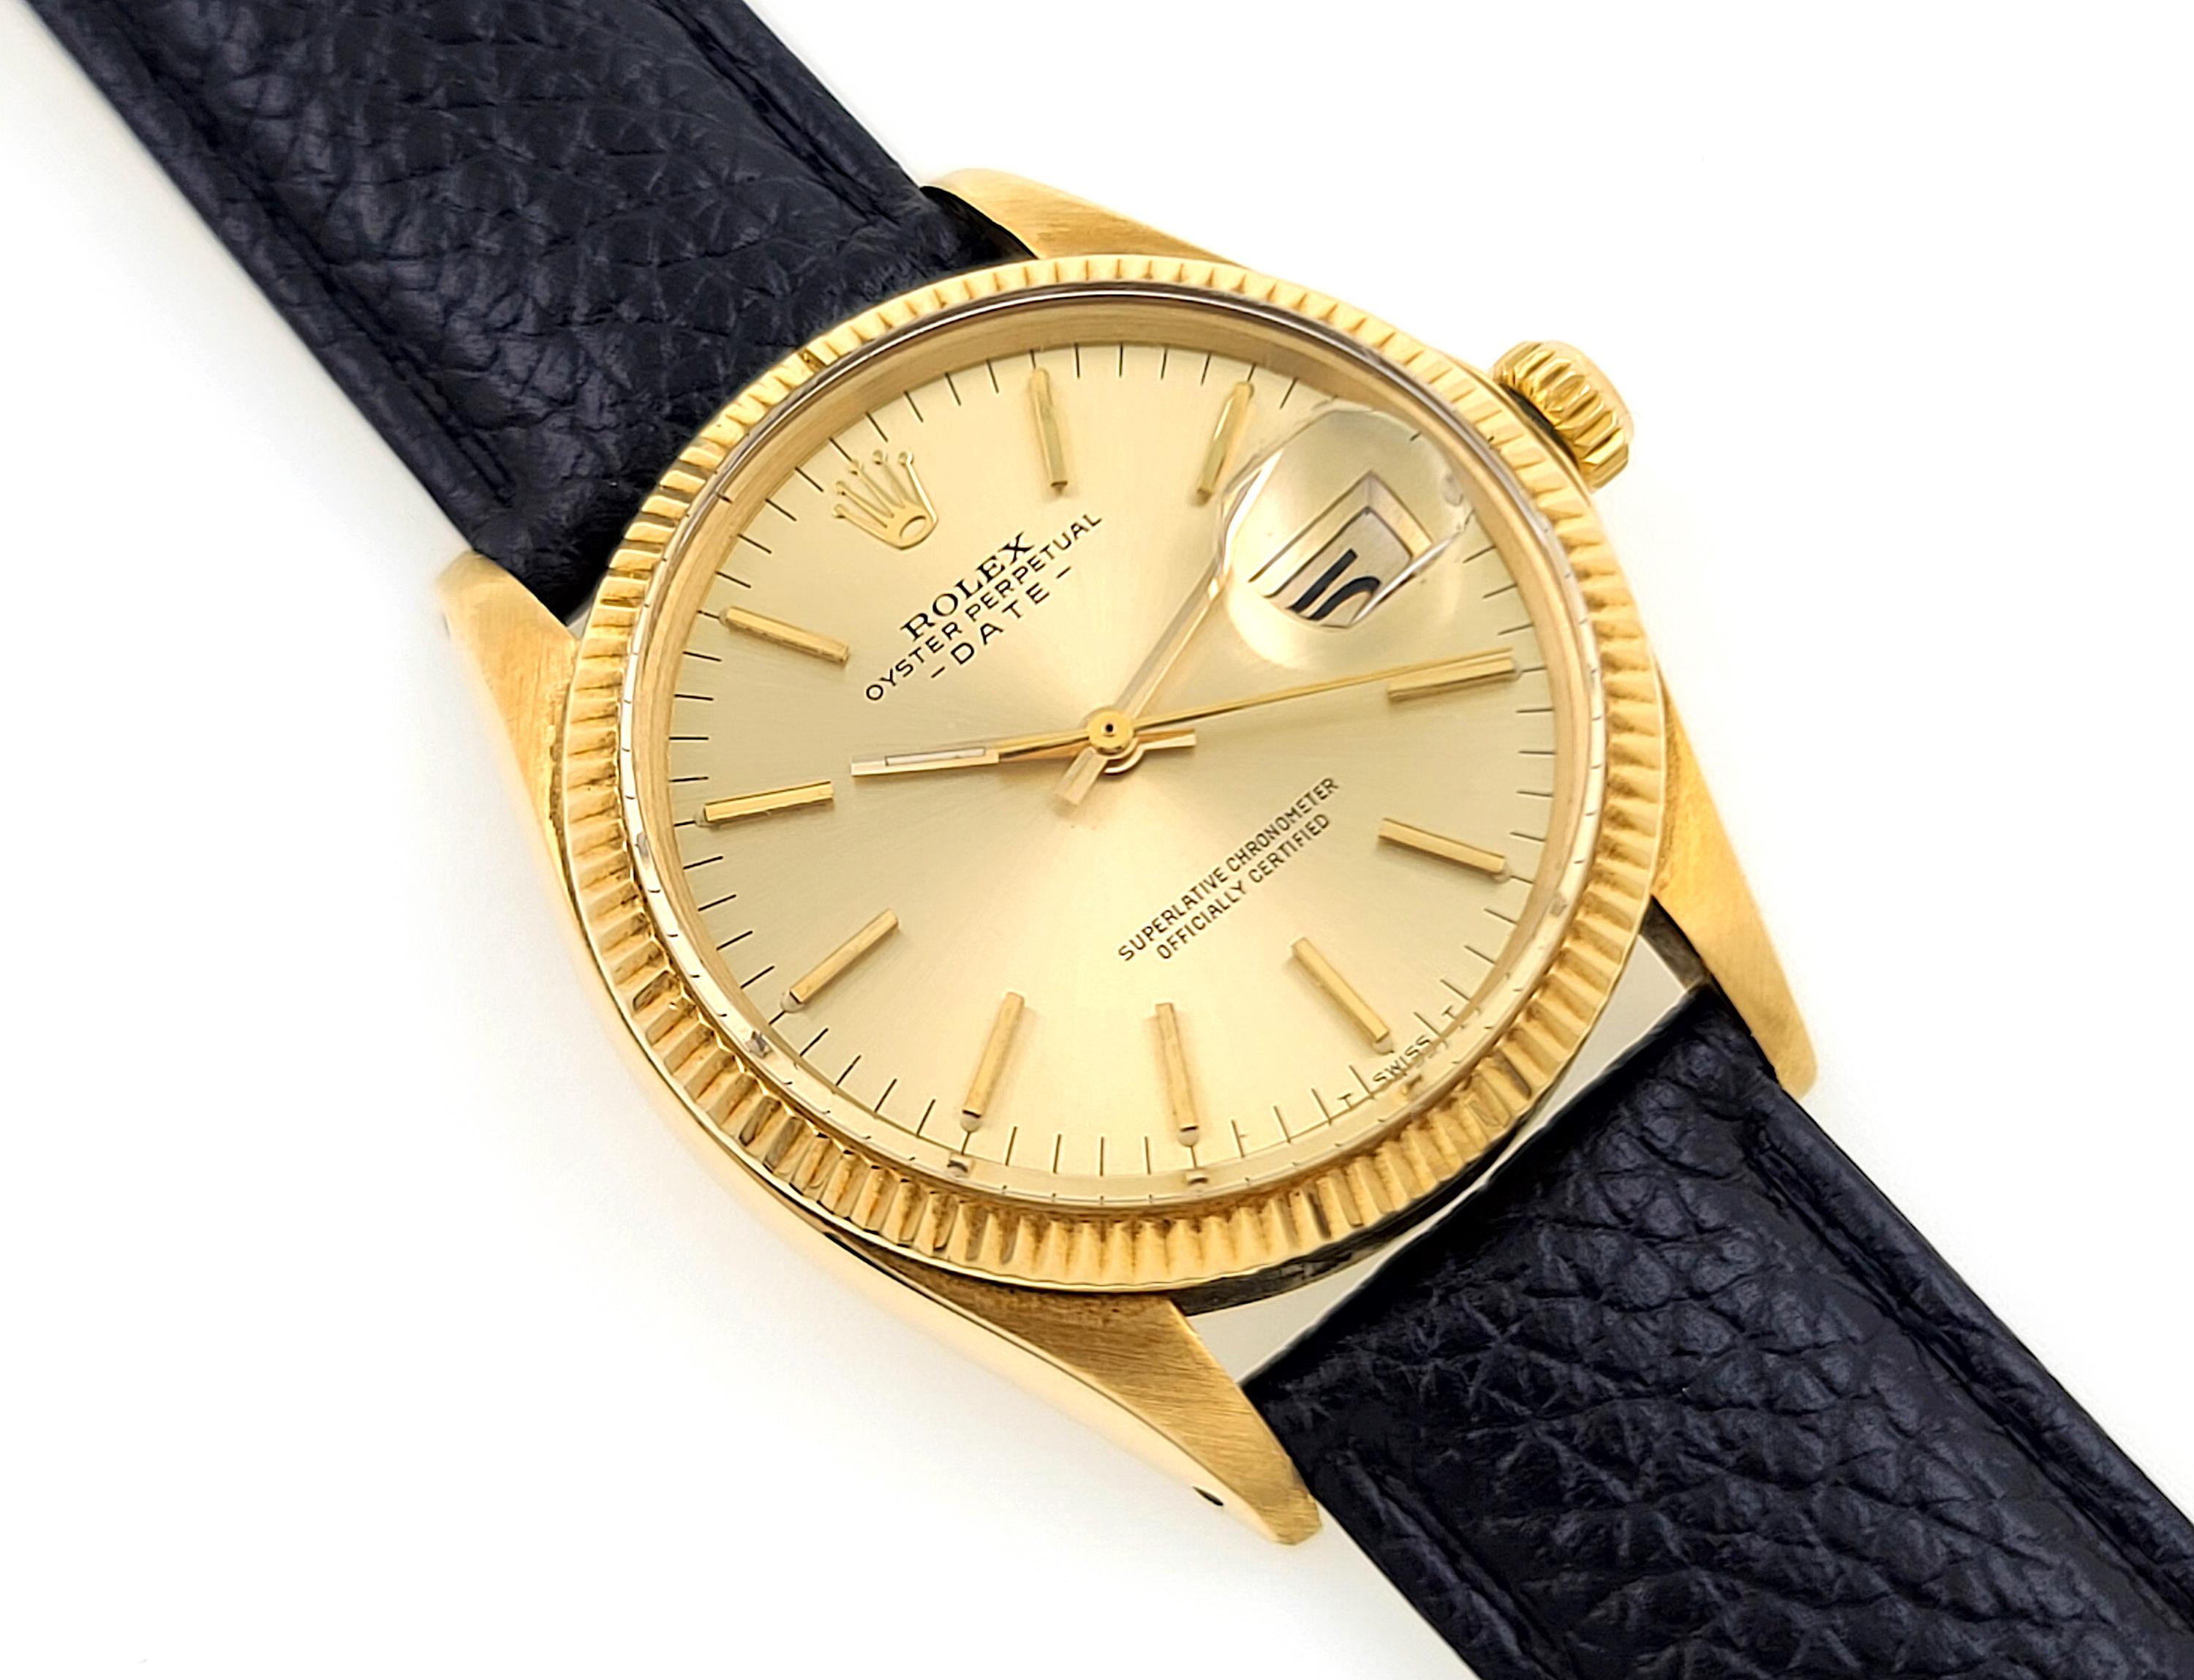 Rolex Oyster Perpetual Date 1503 Gold Sunburst Dial Solid Gold 14k Gold, 1973 In Excellent Condition For Sale In Neuilly-sur-Seine, IDF